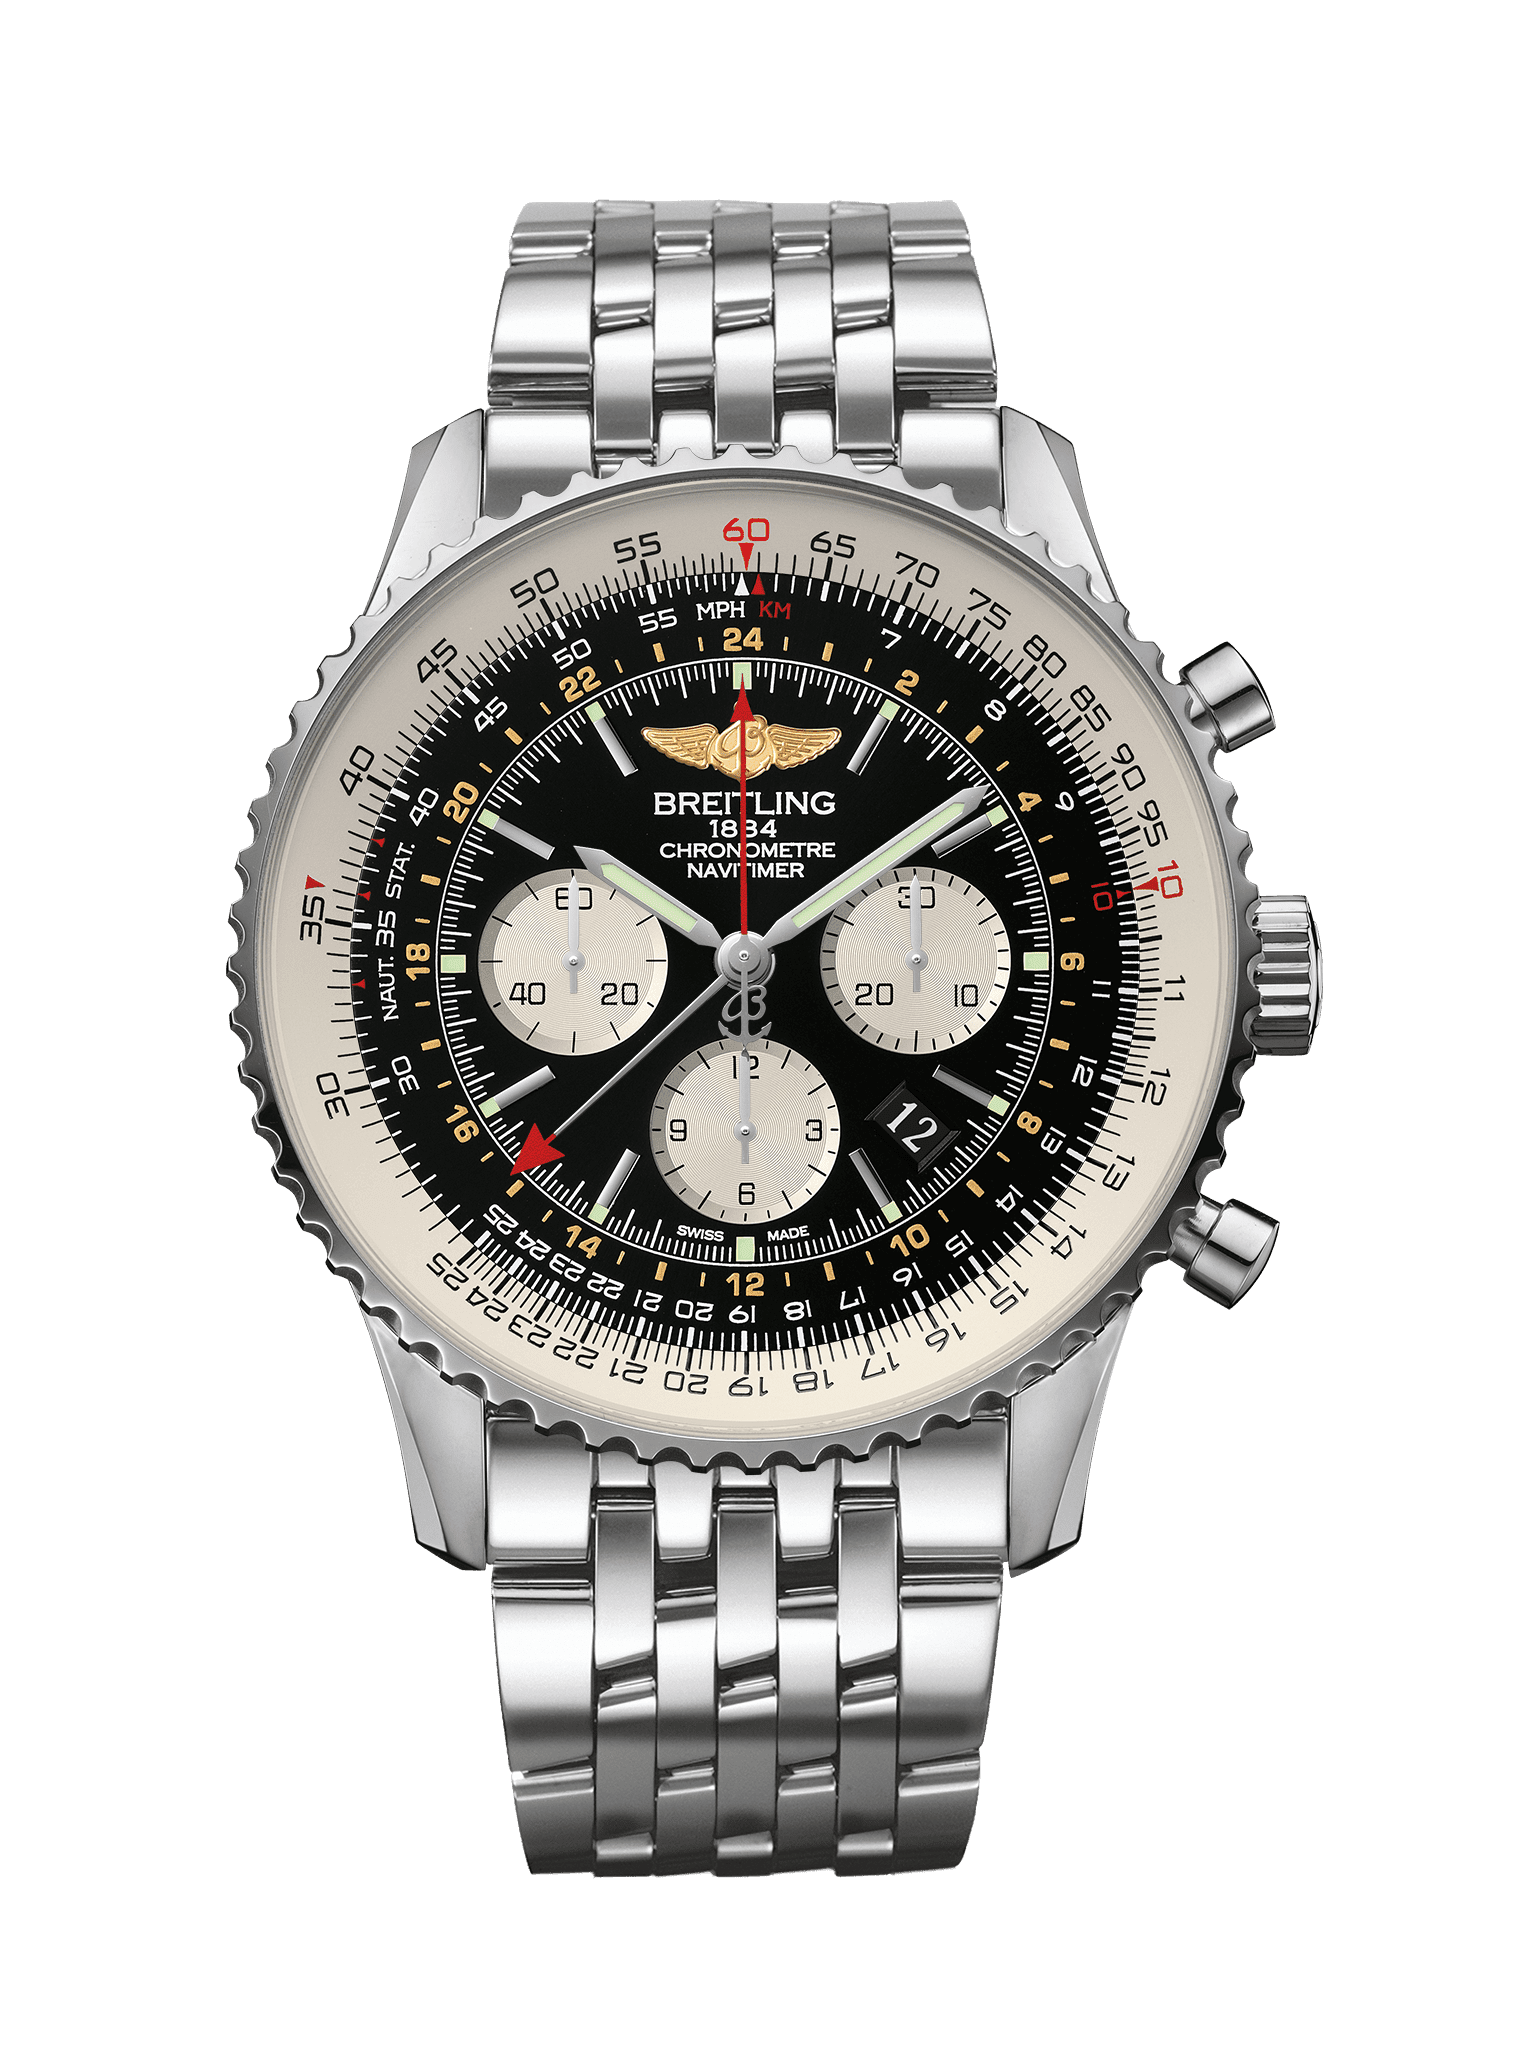 Breitling Galaxy 41 automaticbreitling 8 Automatic Sunavitimer Pilot Date 41 Black Dial A45330101B1x2